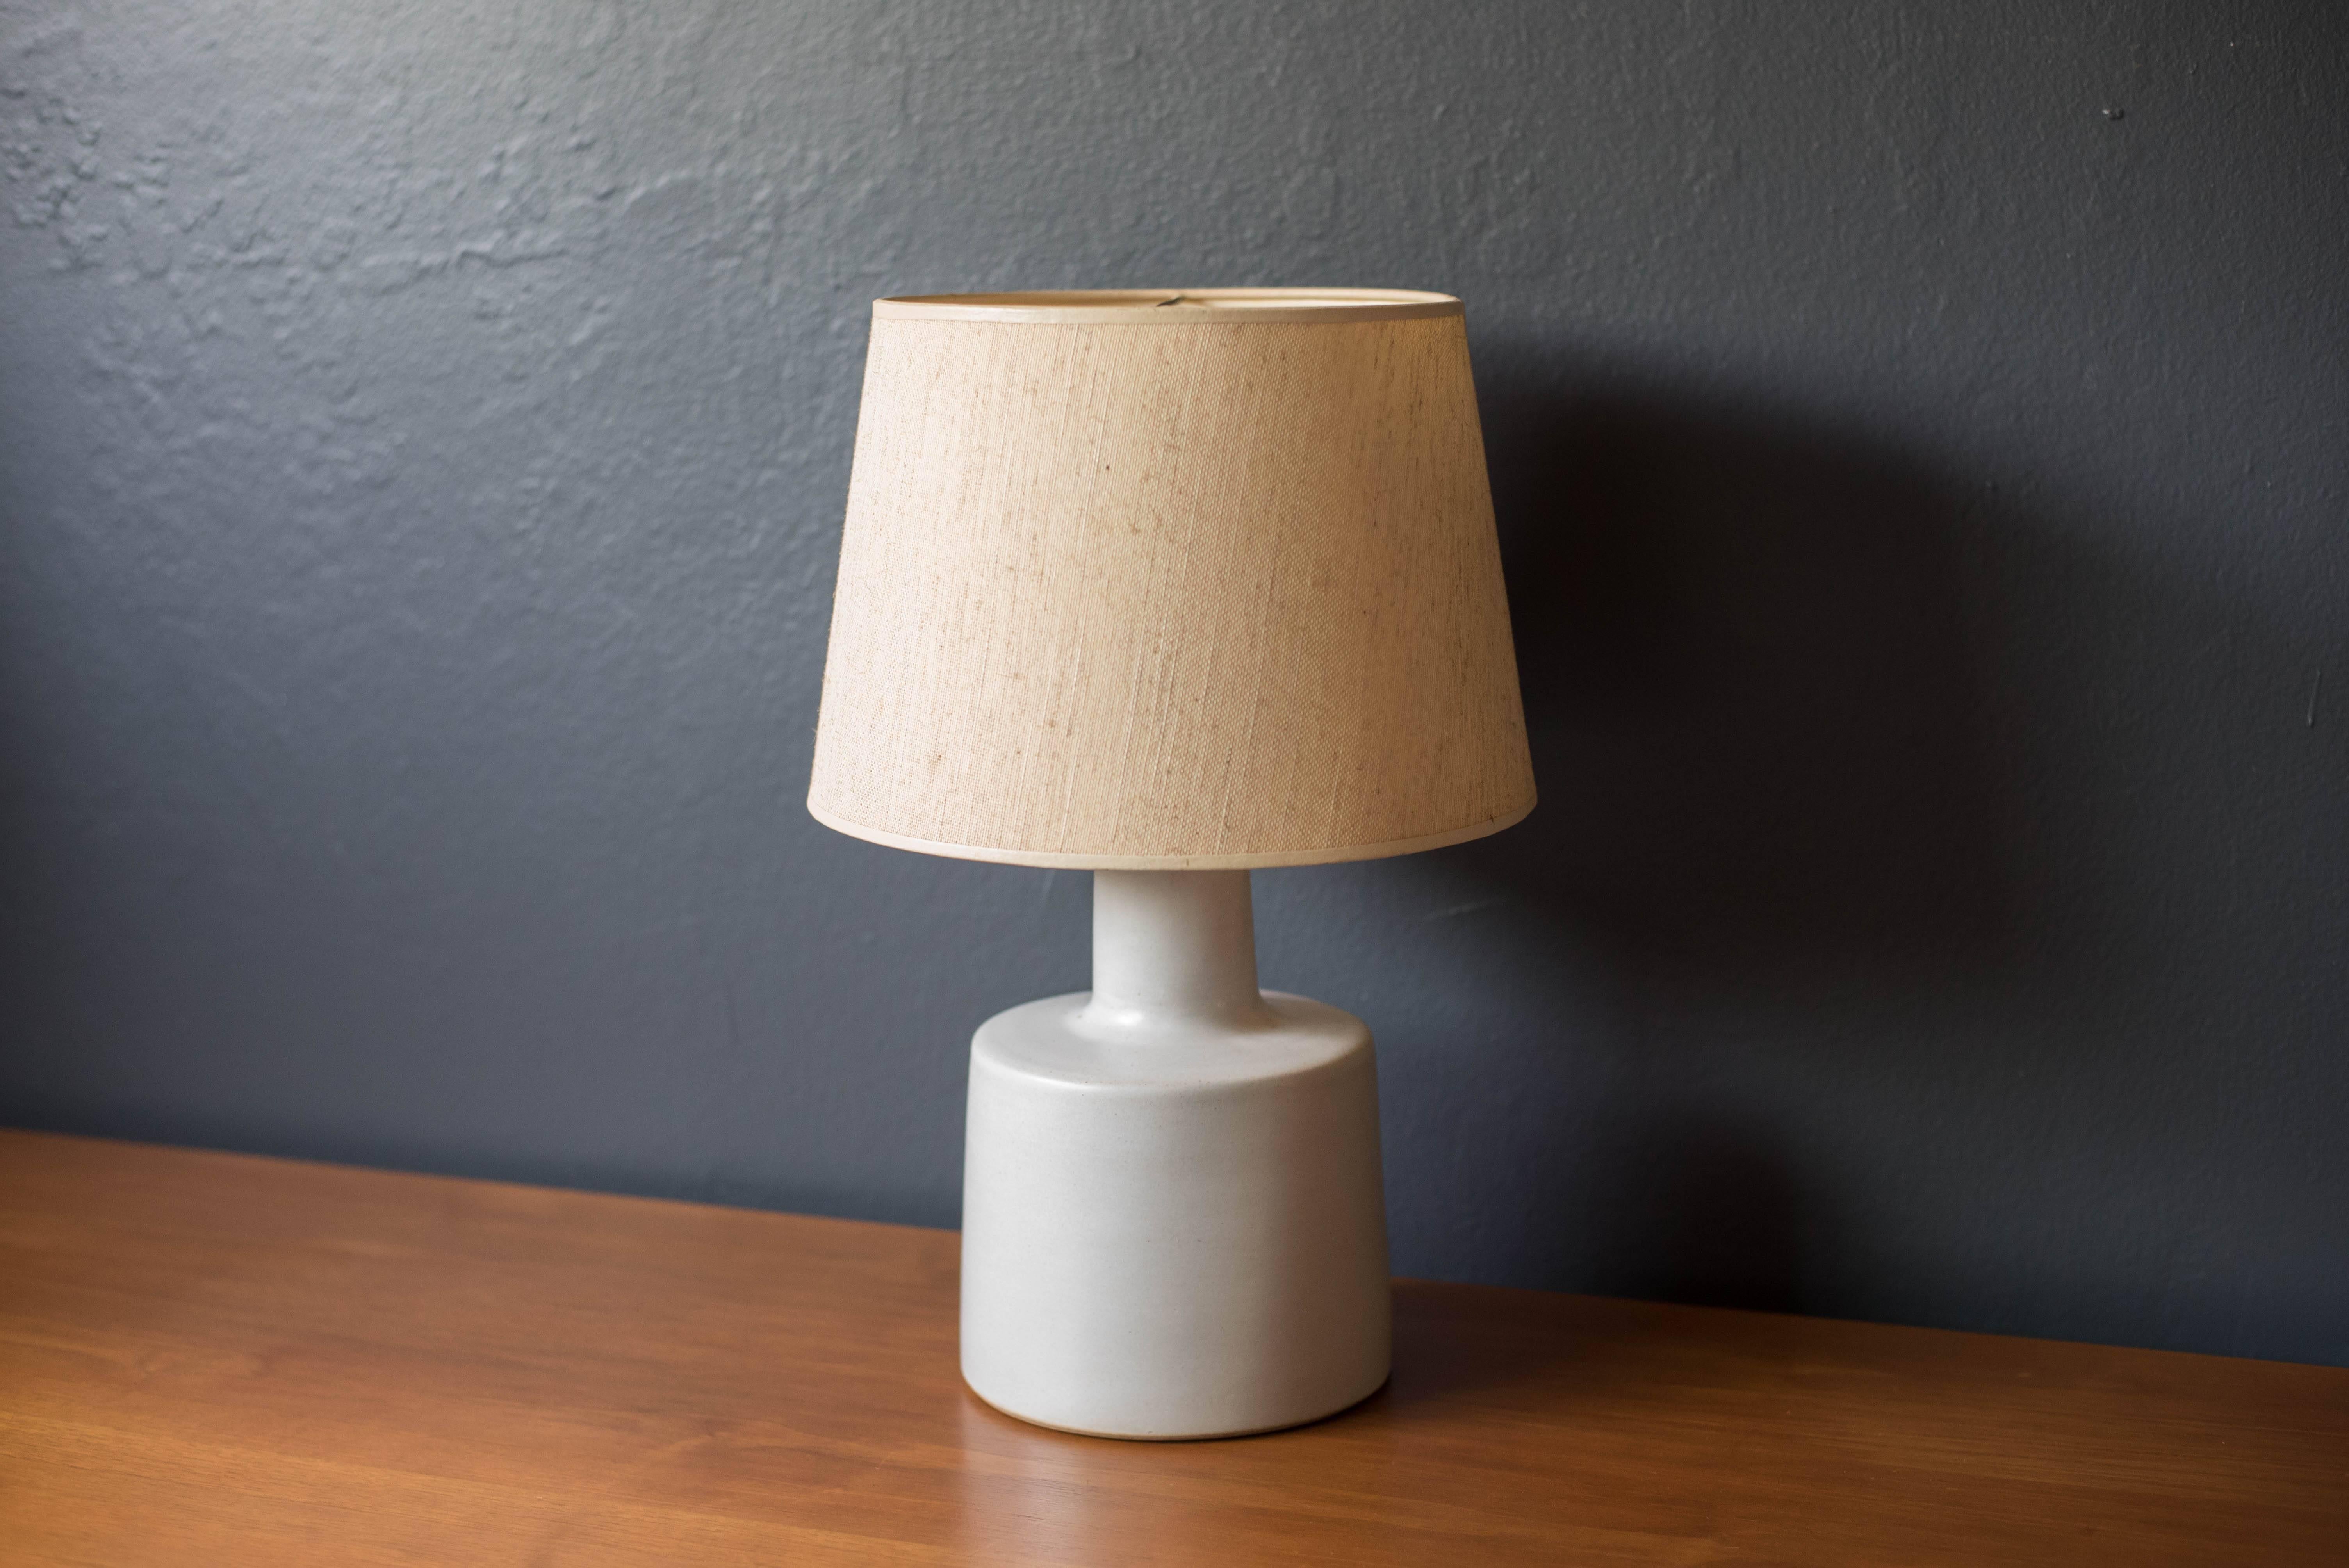 Mid-Century stoneware pottery lamp by Jane and Gordon Martz for Marshall Studios. This piece has a white or light grey matte finish and comes with the original Martz burlap shade.

Measures: 6.5